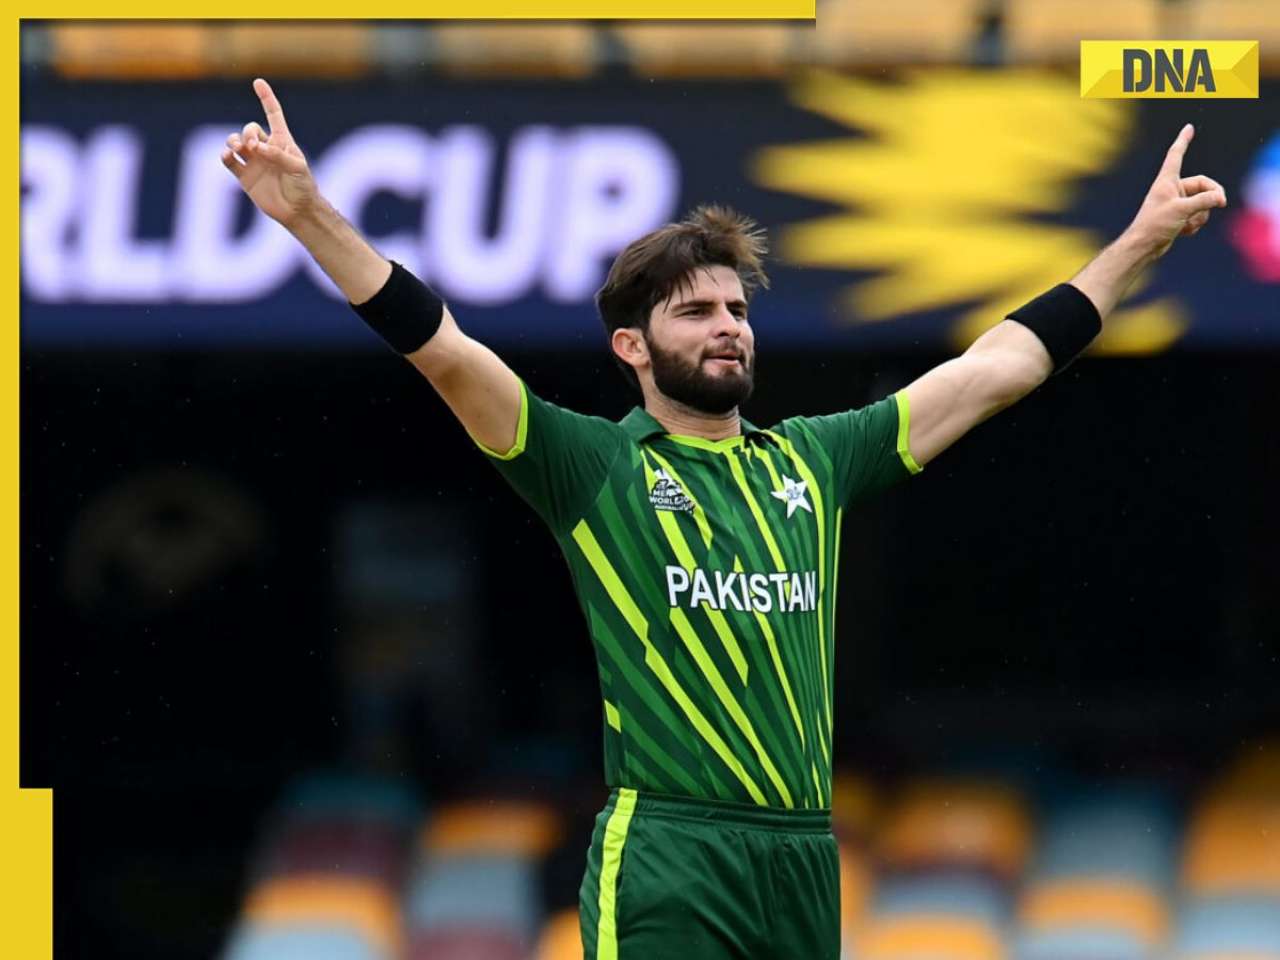 'Don't test...': Shaheen Afridi's cryptic Instagram post goes viral after losing Pakistan captaincy to Babar Azam